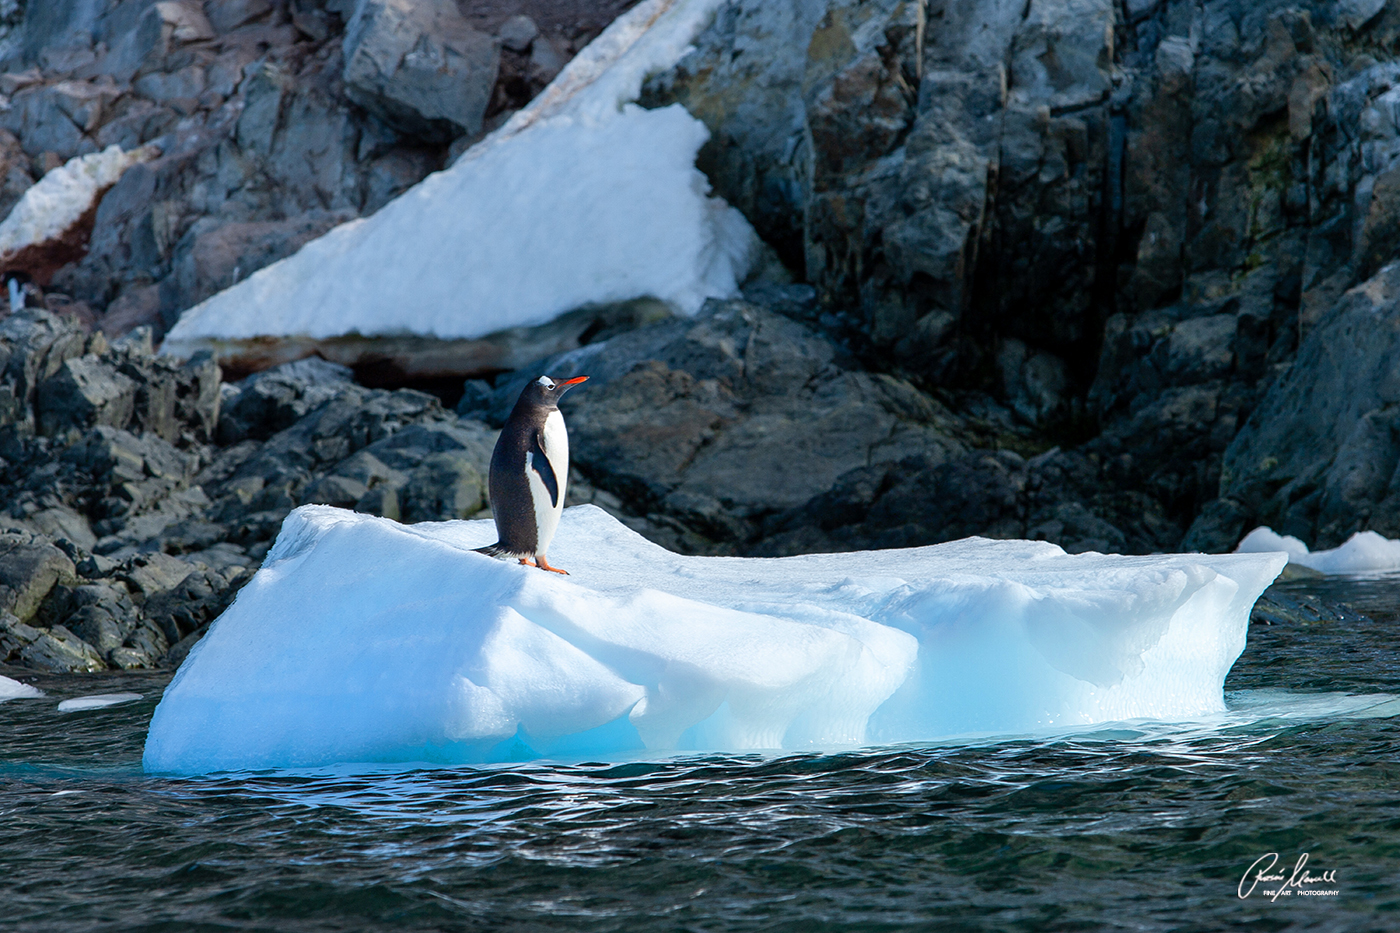 A Gentoo Penguin is standing alone on a floating Iceberg against a dark and rocky island backdrop near the Cuverville Island waters in Antarctica.